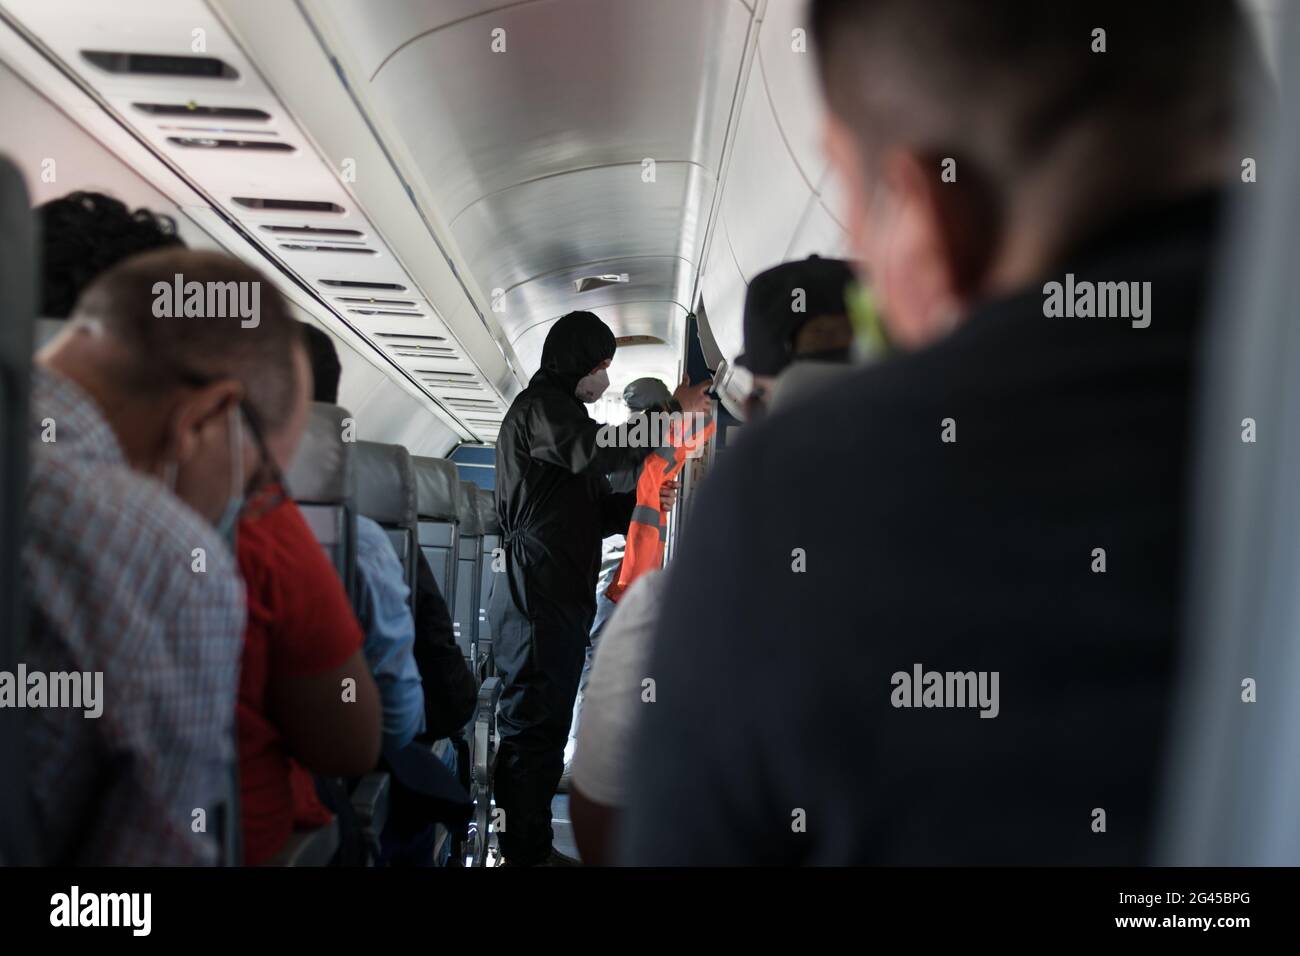 A flight attendant using a antifluid vest prepares safety instructions as the Colombian government sponsored free repatriation flights back to Colombia admist the novel Coronavirus (COVID-19) outbreak and the result of commercial flights grounded, in Miami, Florida, U.S, on August 7, 2020. Stock Photo